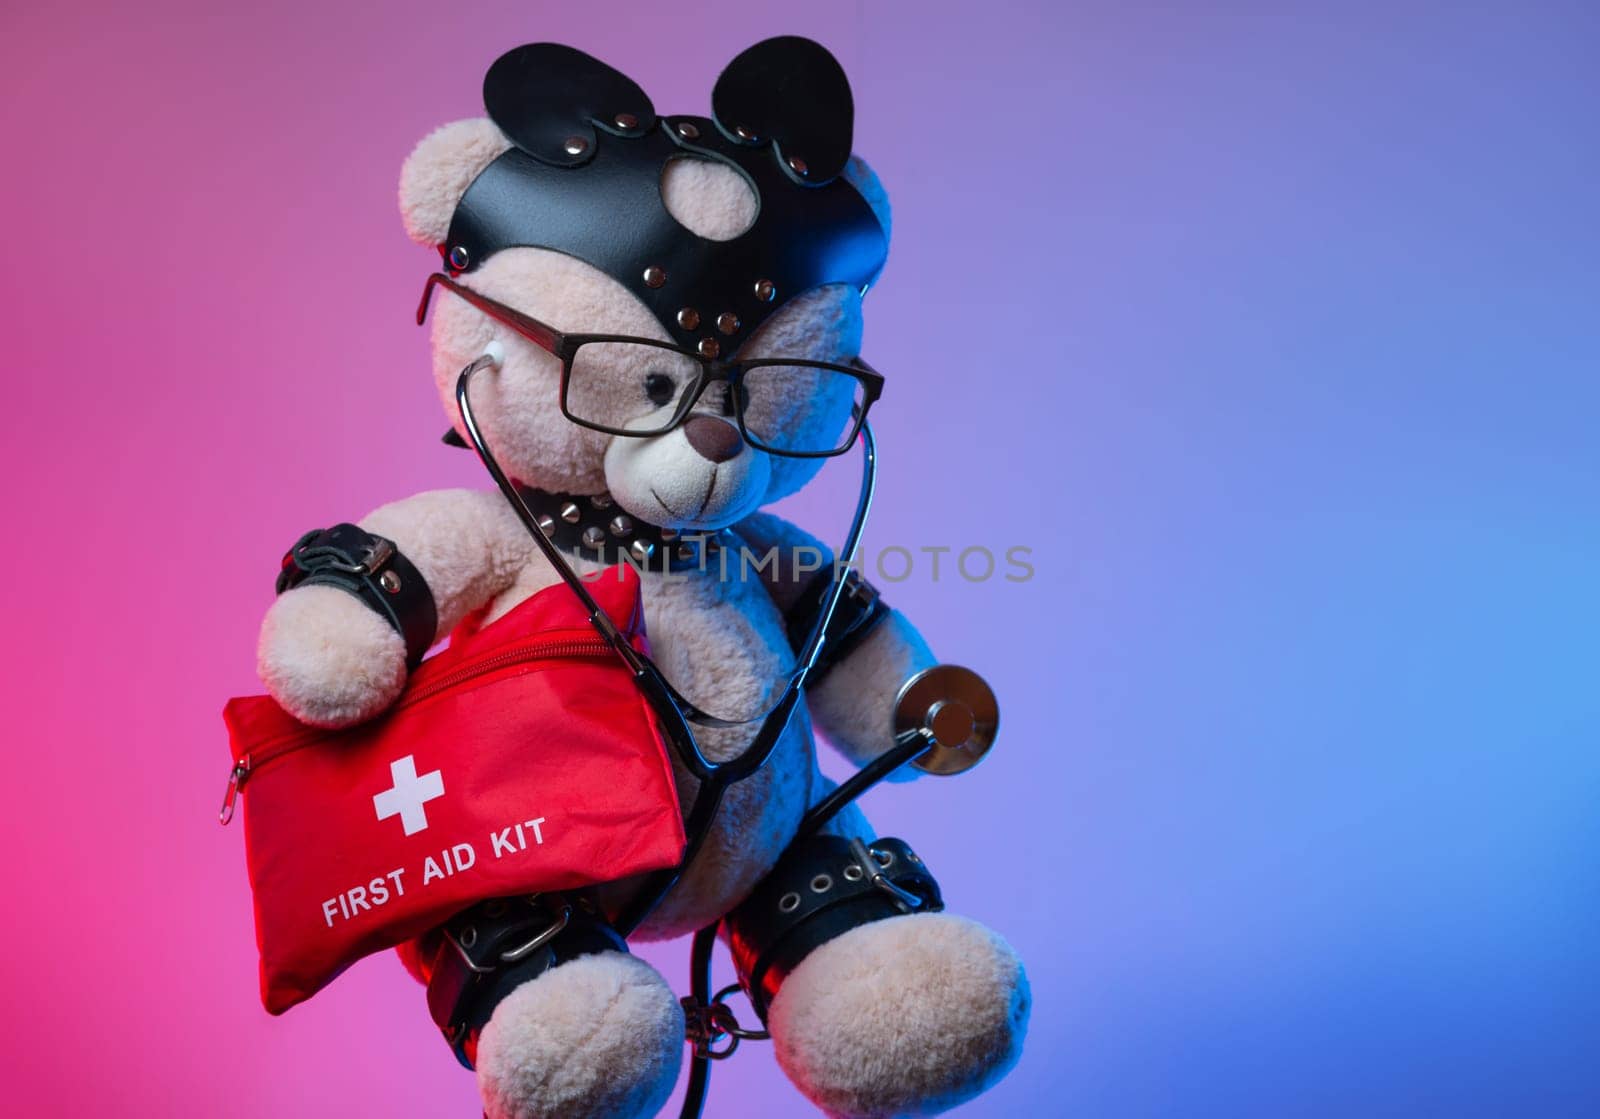 a toy teddy bear with leather straps and a mask for BDSM games with a first aid kit , safety and precautions in bdsm sex games